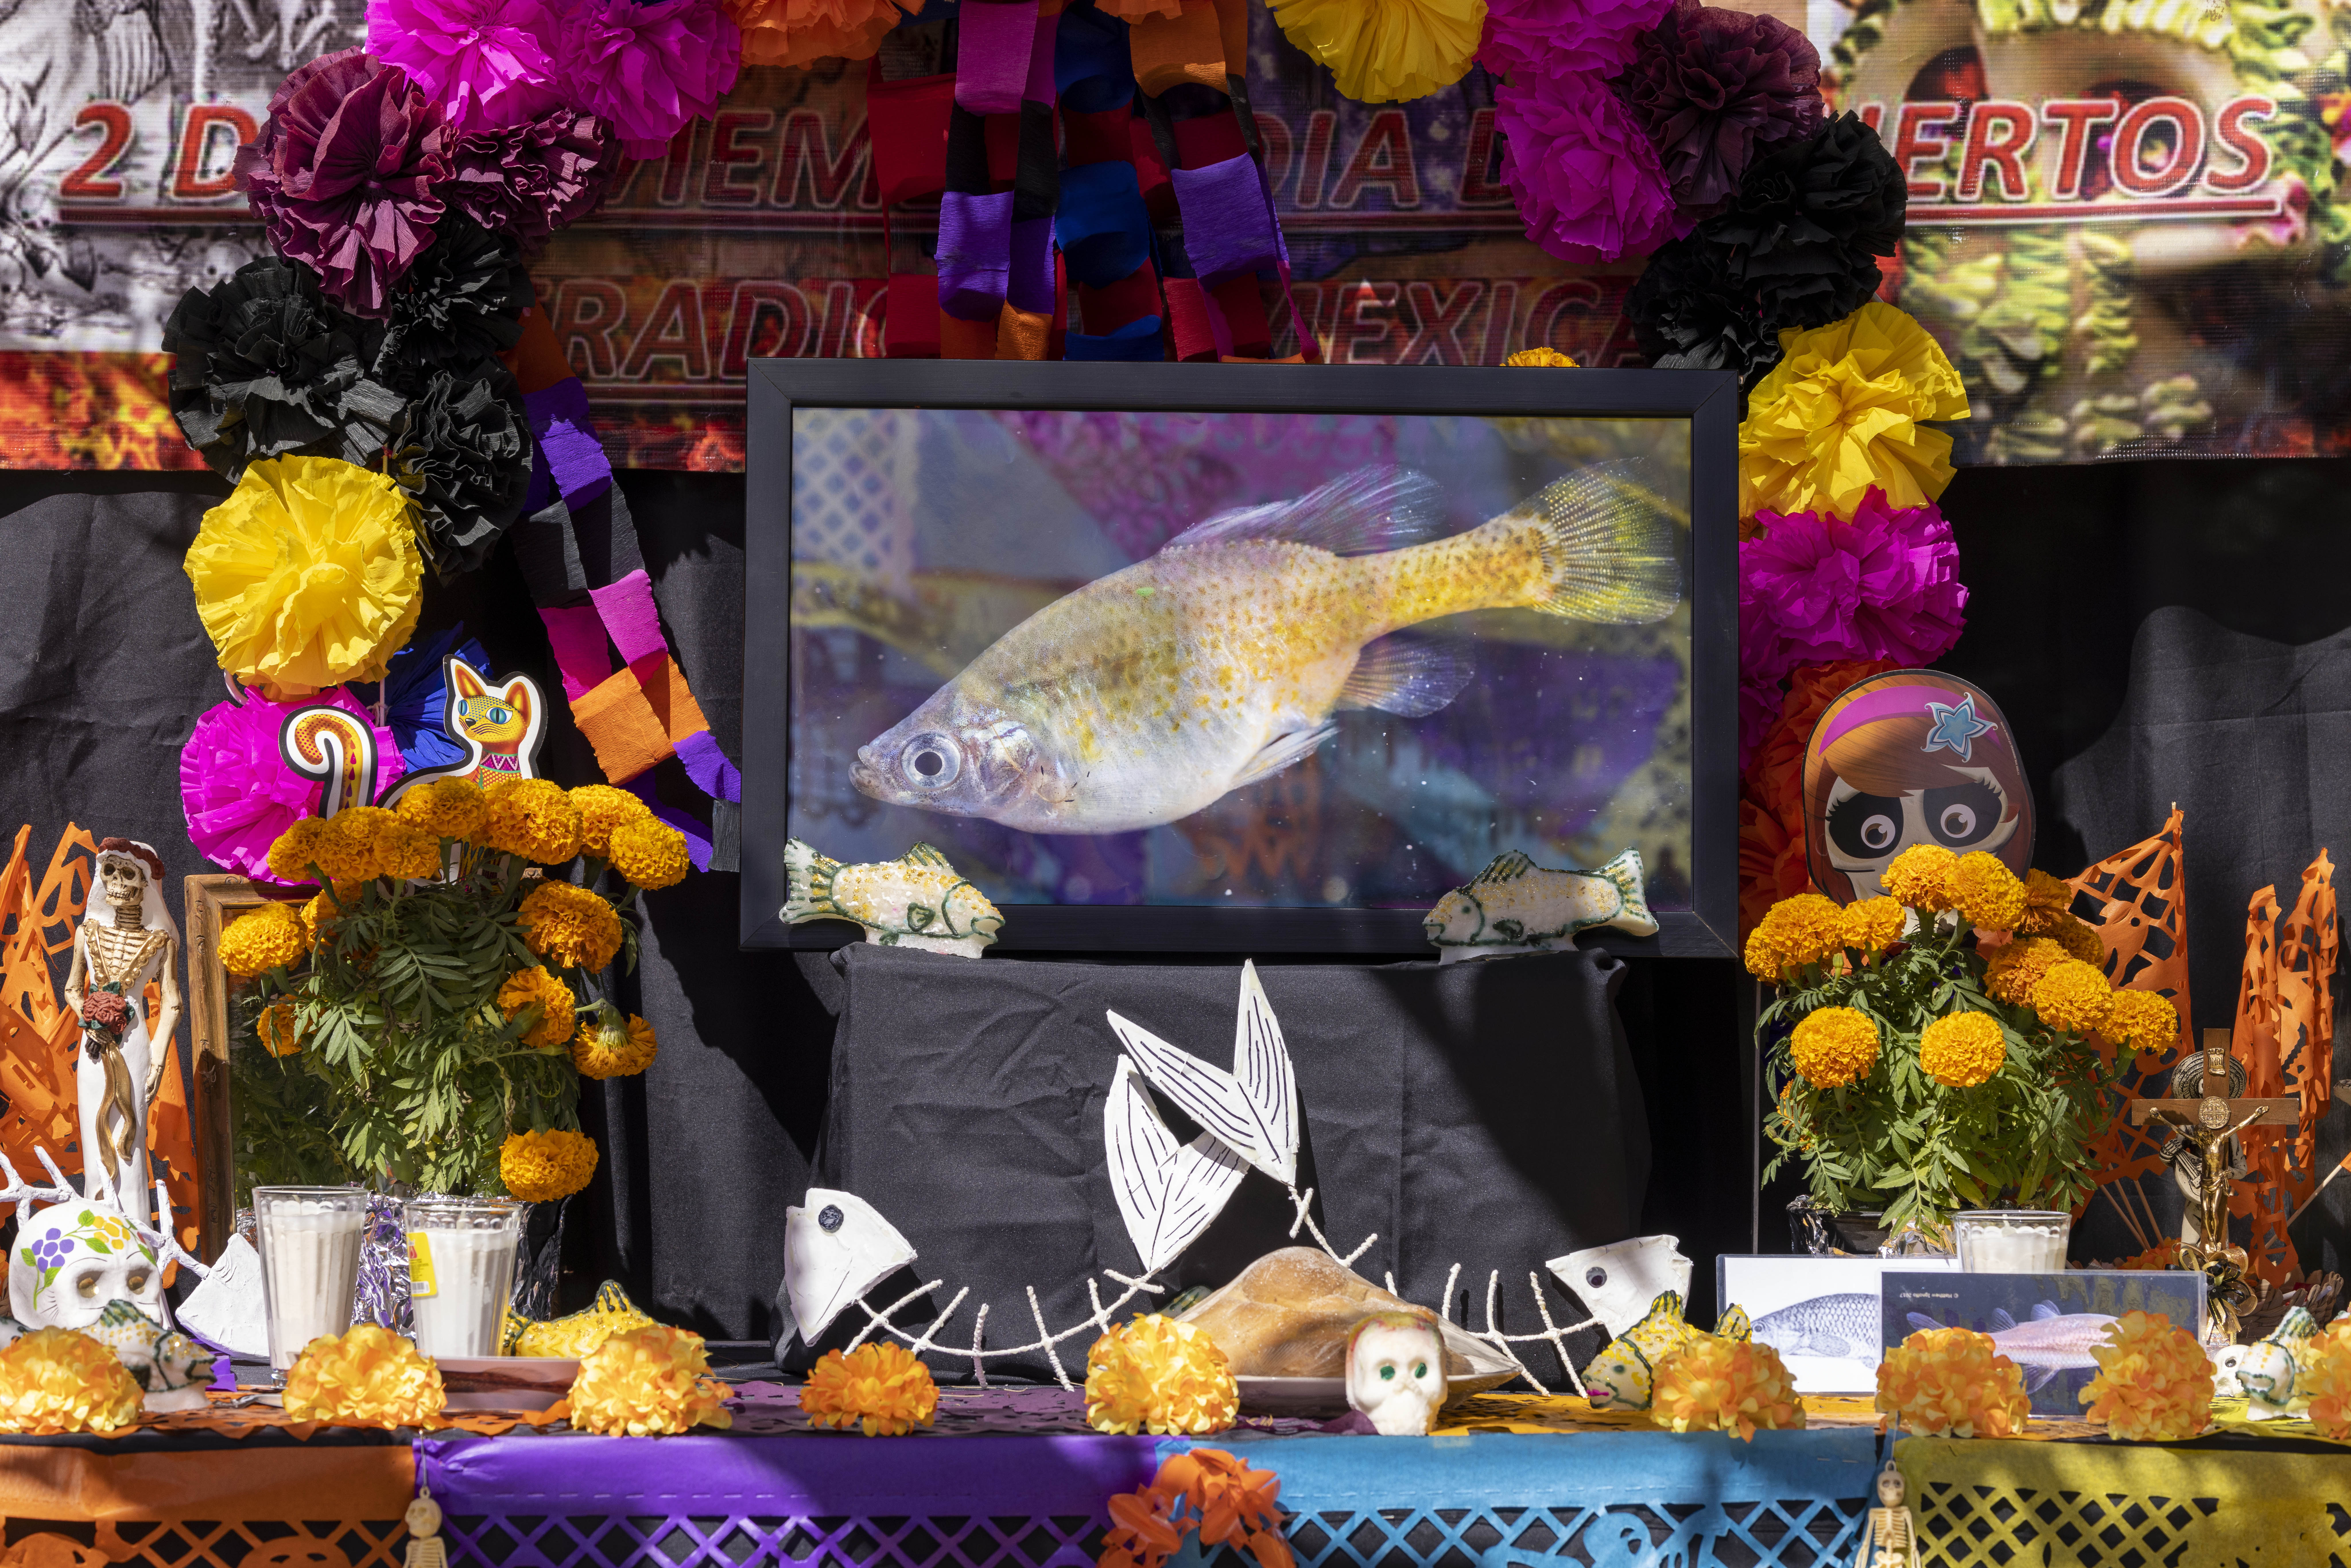 Day of the Dead, or Día de los Muertos celebrations in Mexico. A colourful altar dedicated to the golden skiffia. Credit Manfred Meiners.